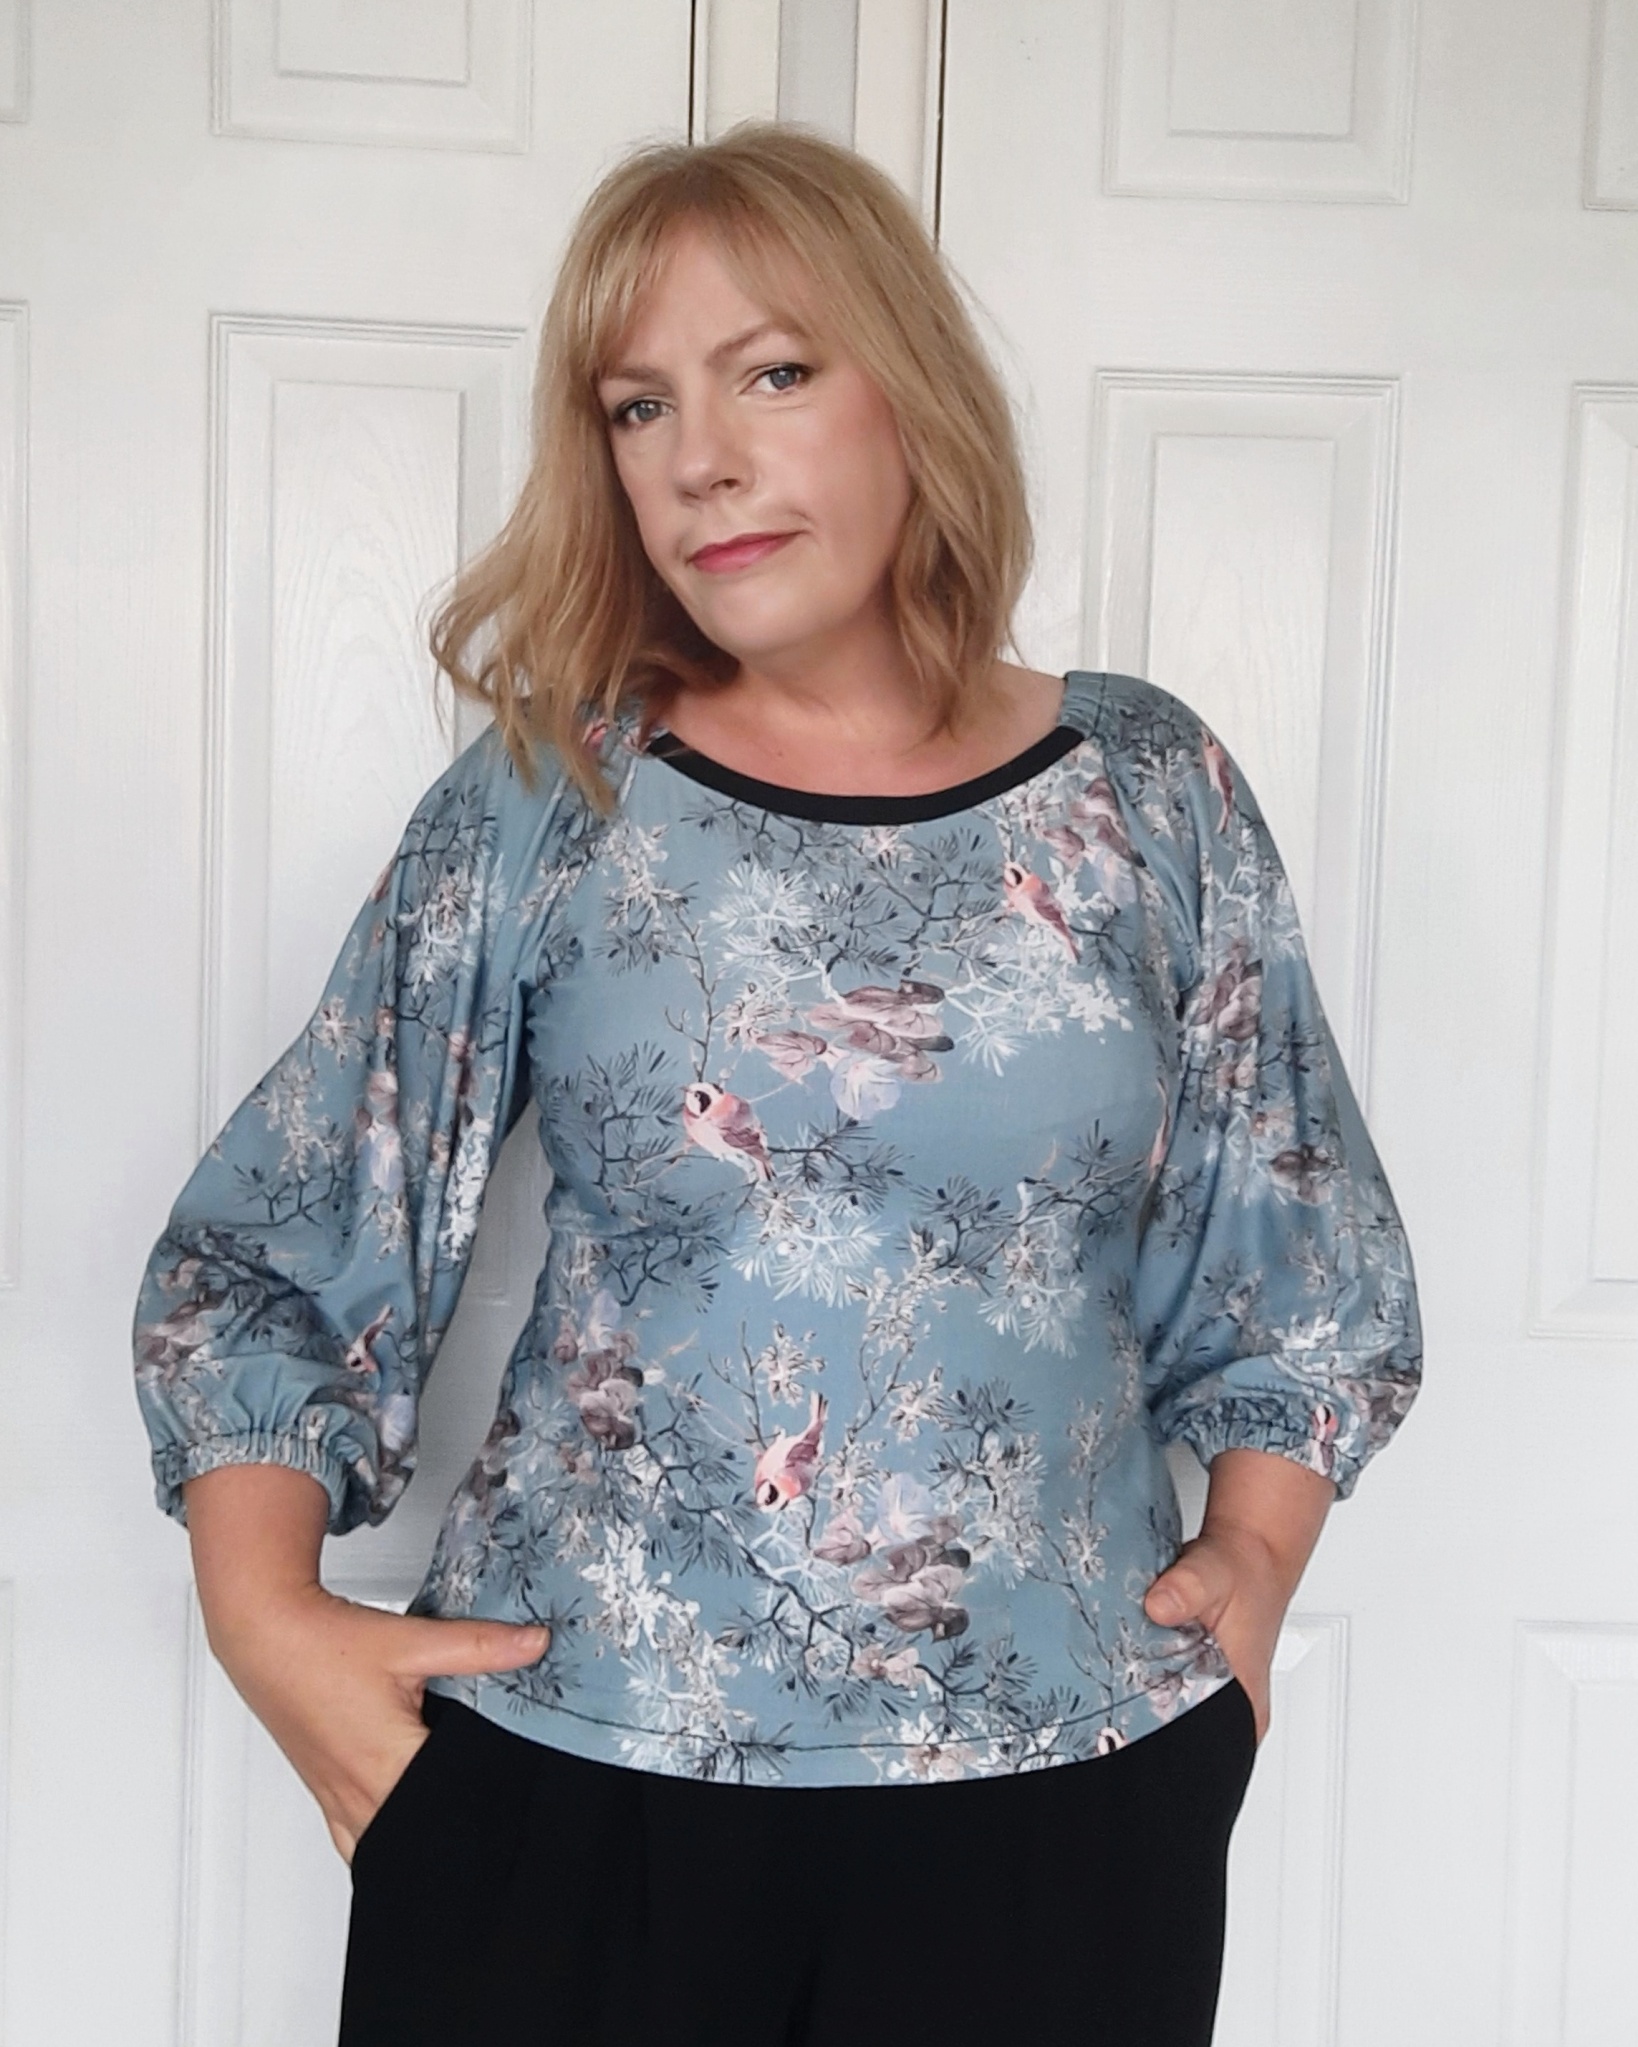 Statement Sleeves; Sewing the Adrienne Blouse by Friday Pattern Co.